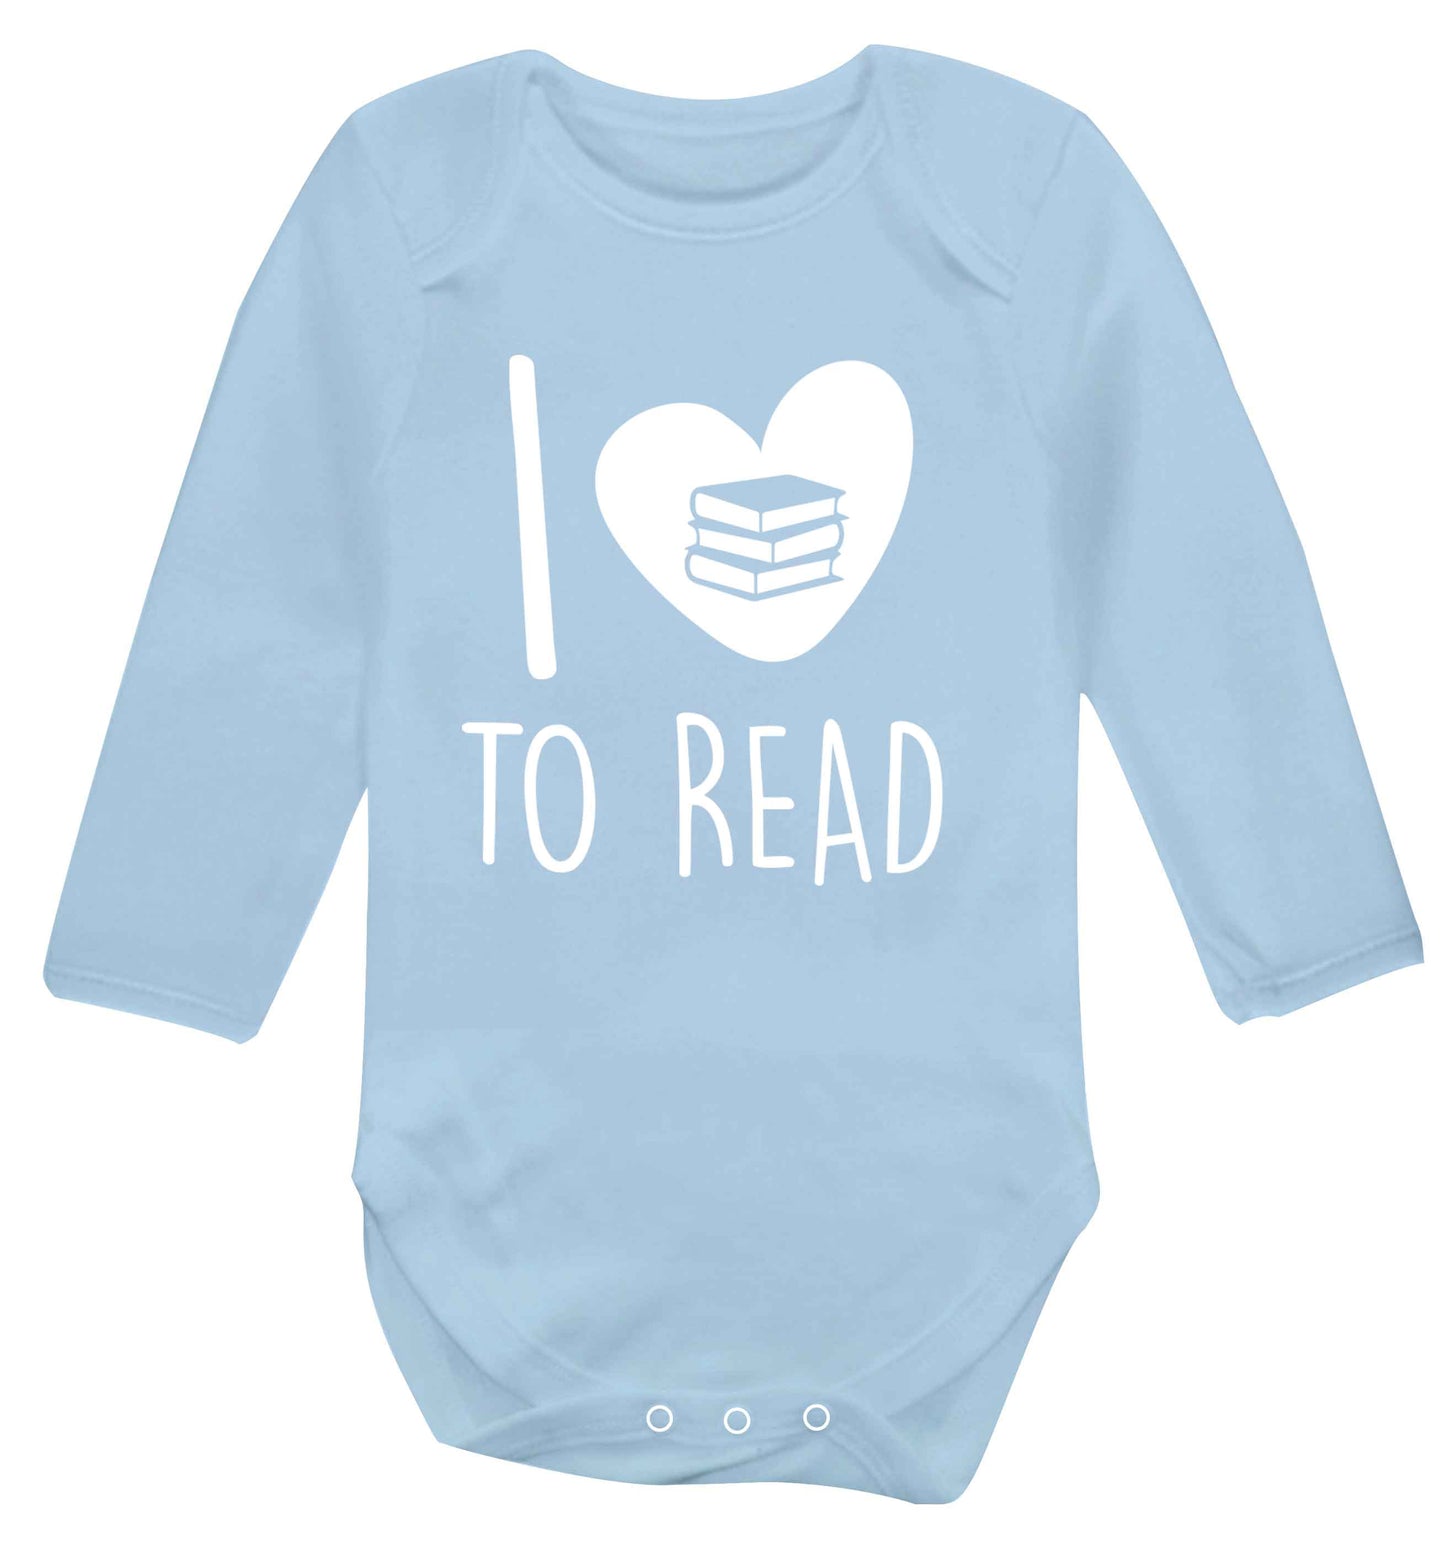 I love to read Baby Vest long sleeved pale blue 6-12 months